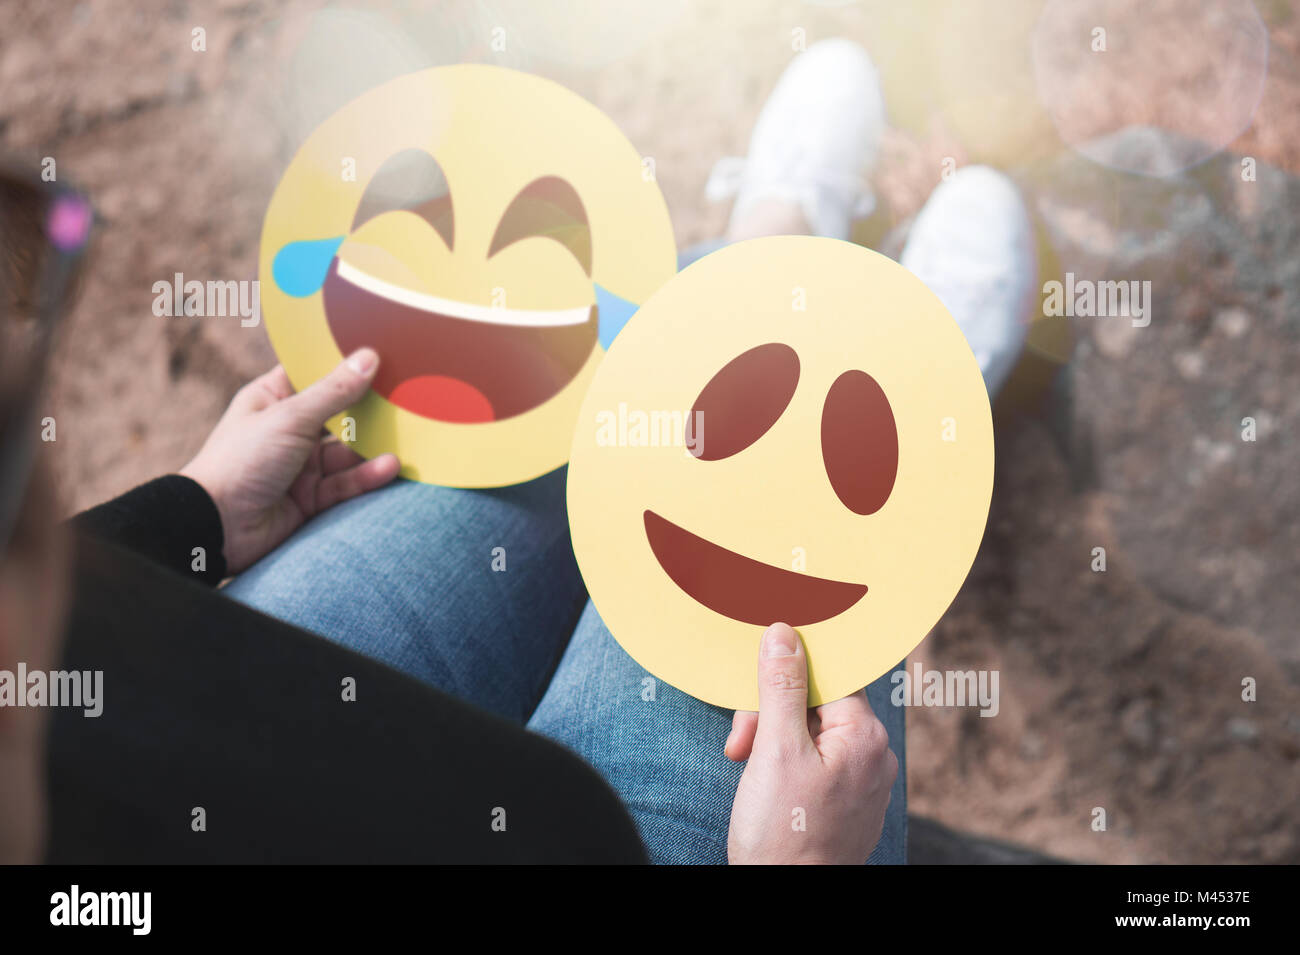 Woman holding 2 cardboard emoticons in hand. Happy laughing and smiling faces. Two modern communication and expression icons printed on paper. Stock Photo